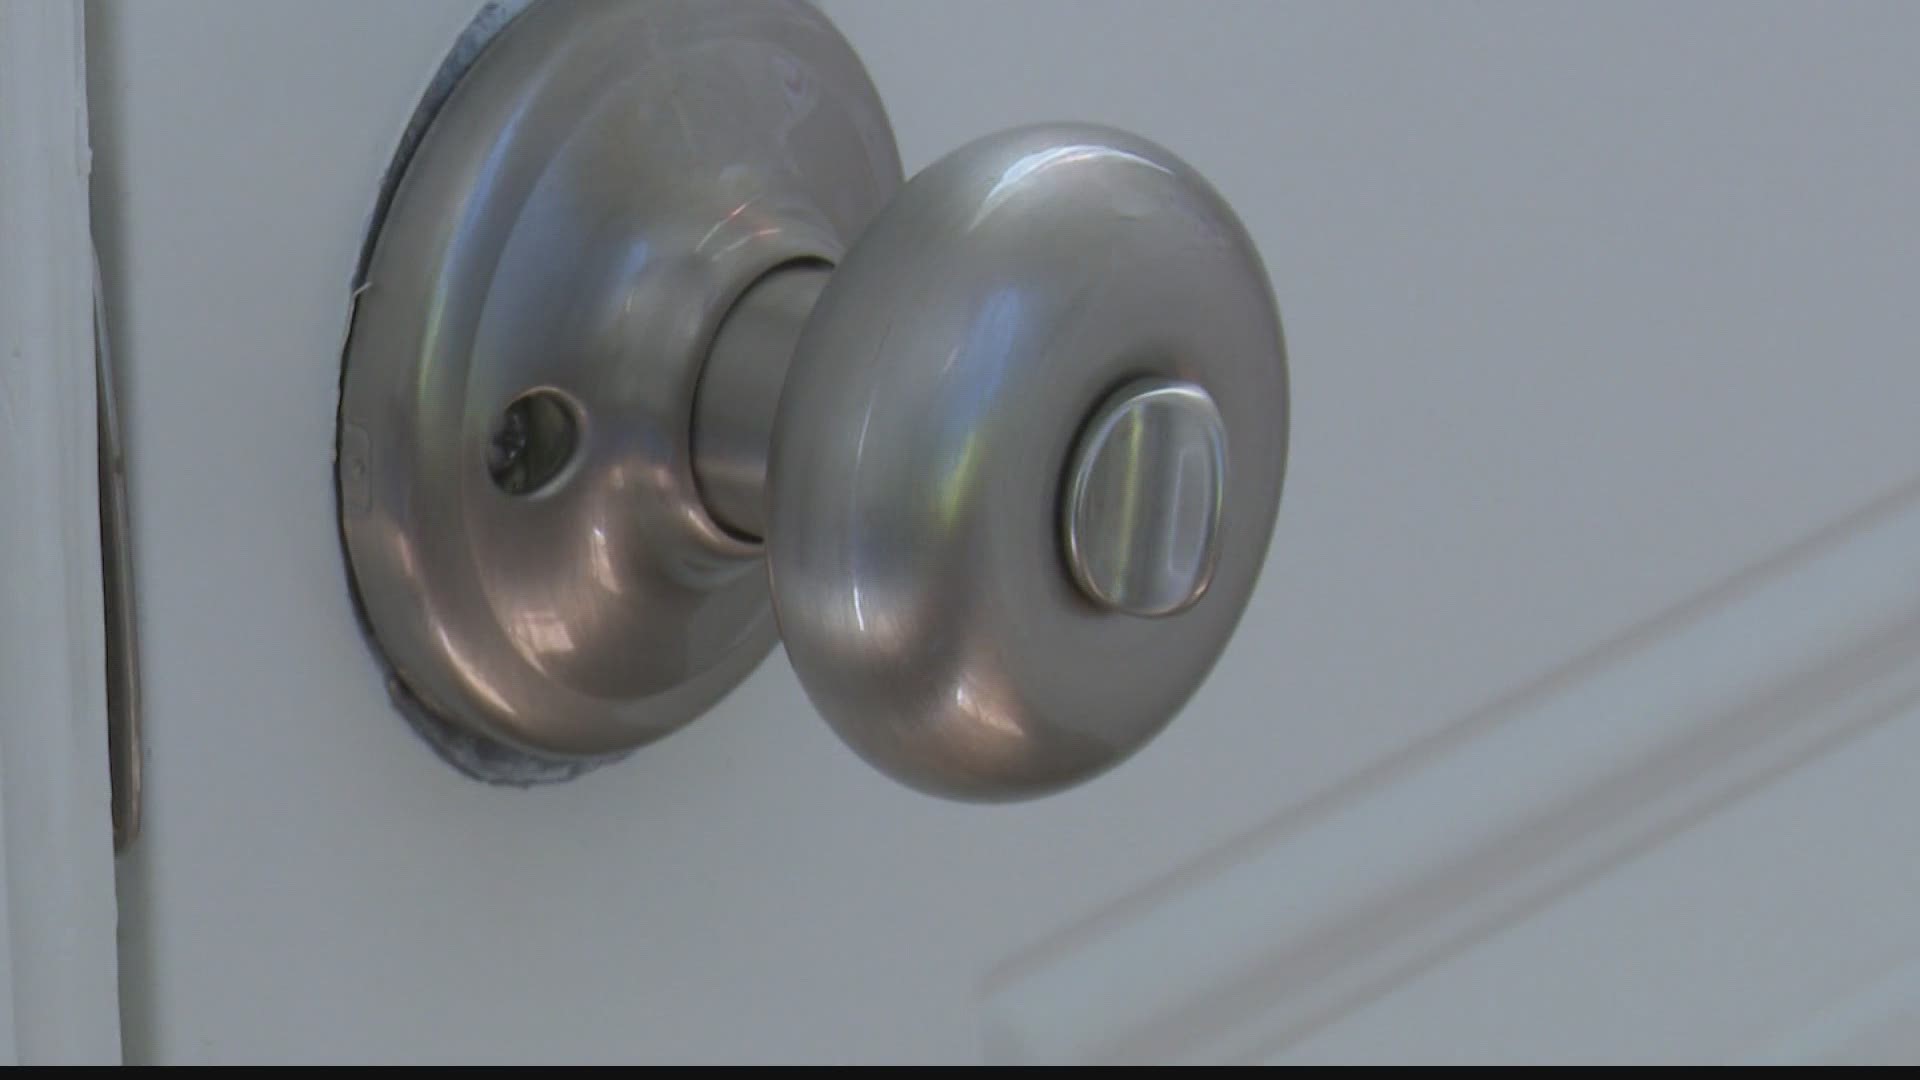 When was the last time you cleaned your doorknobs?